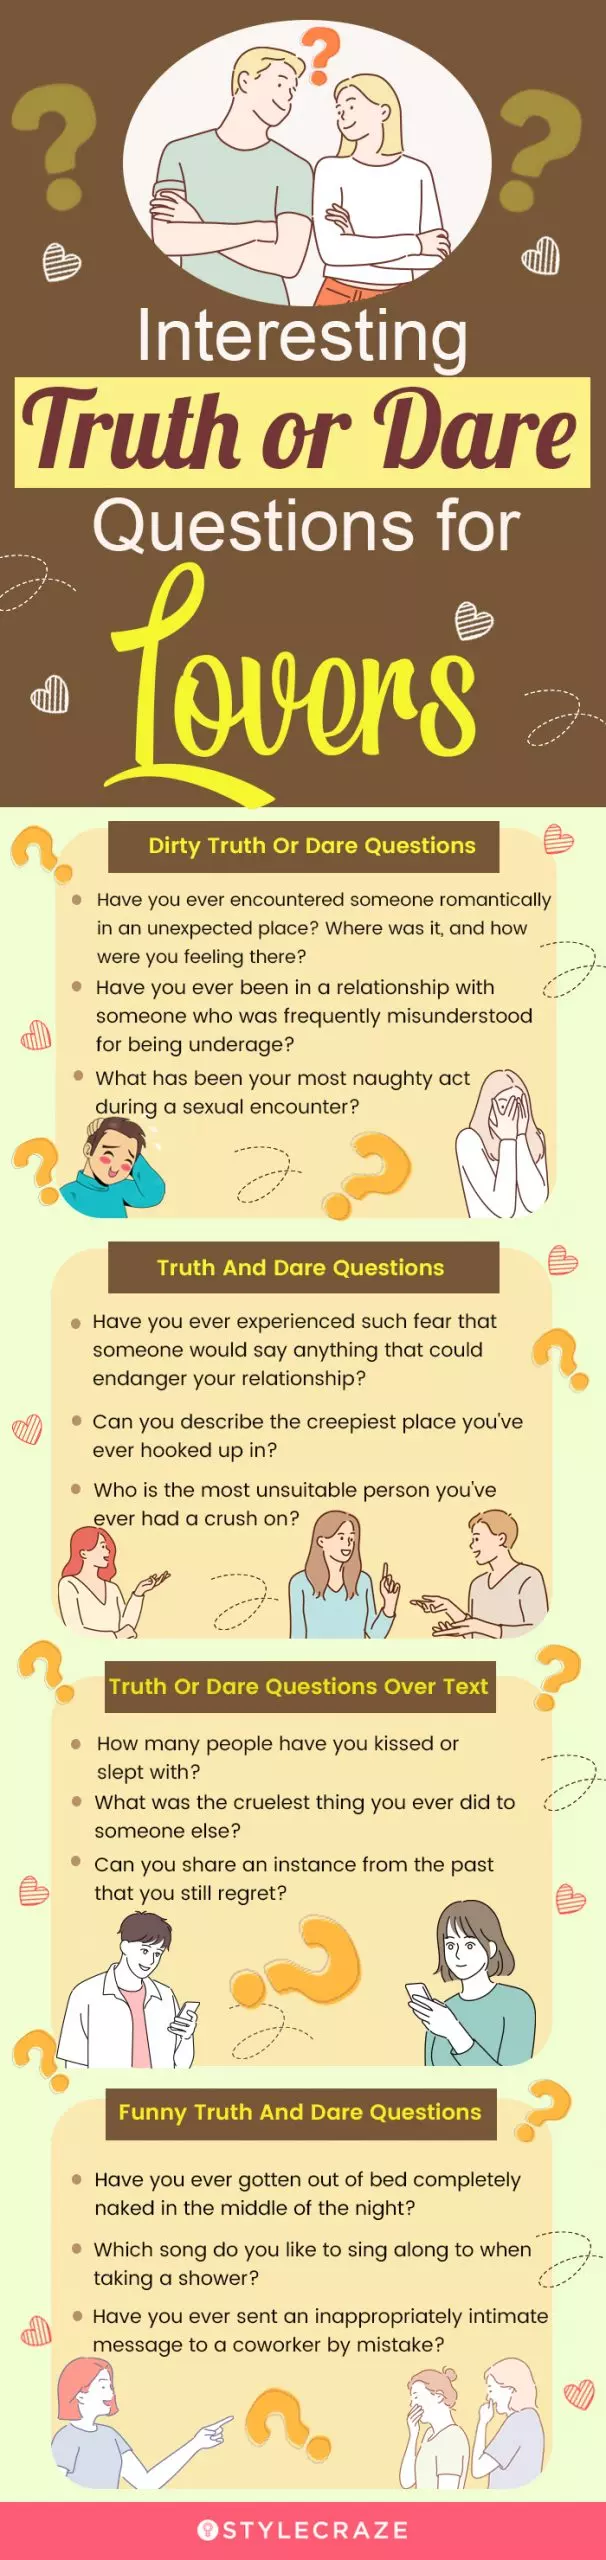 interesting truth or dare questions for lovers (infographic)